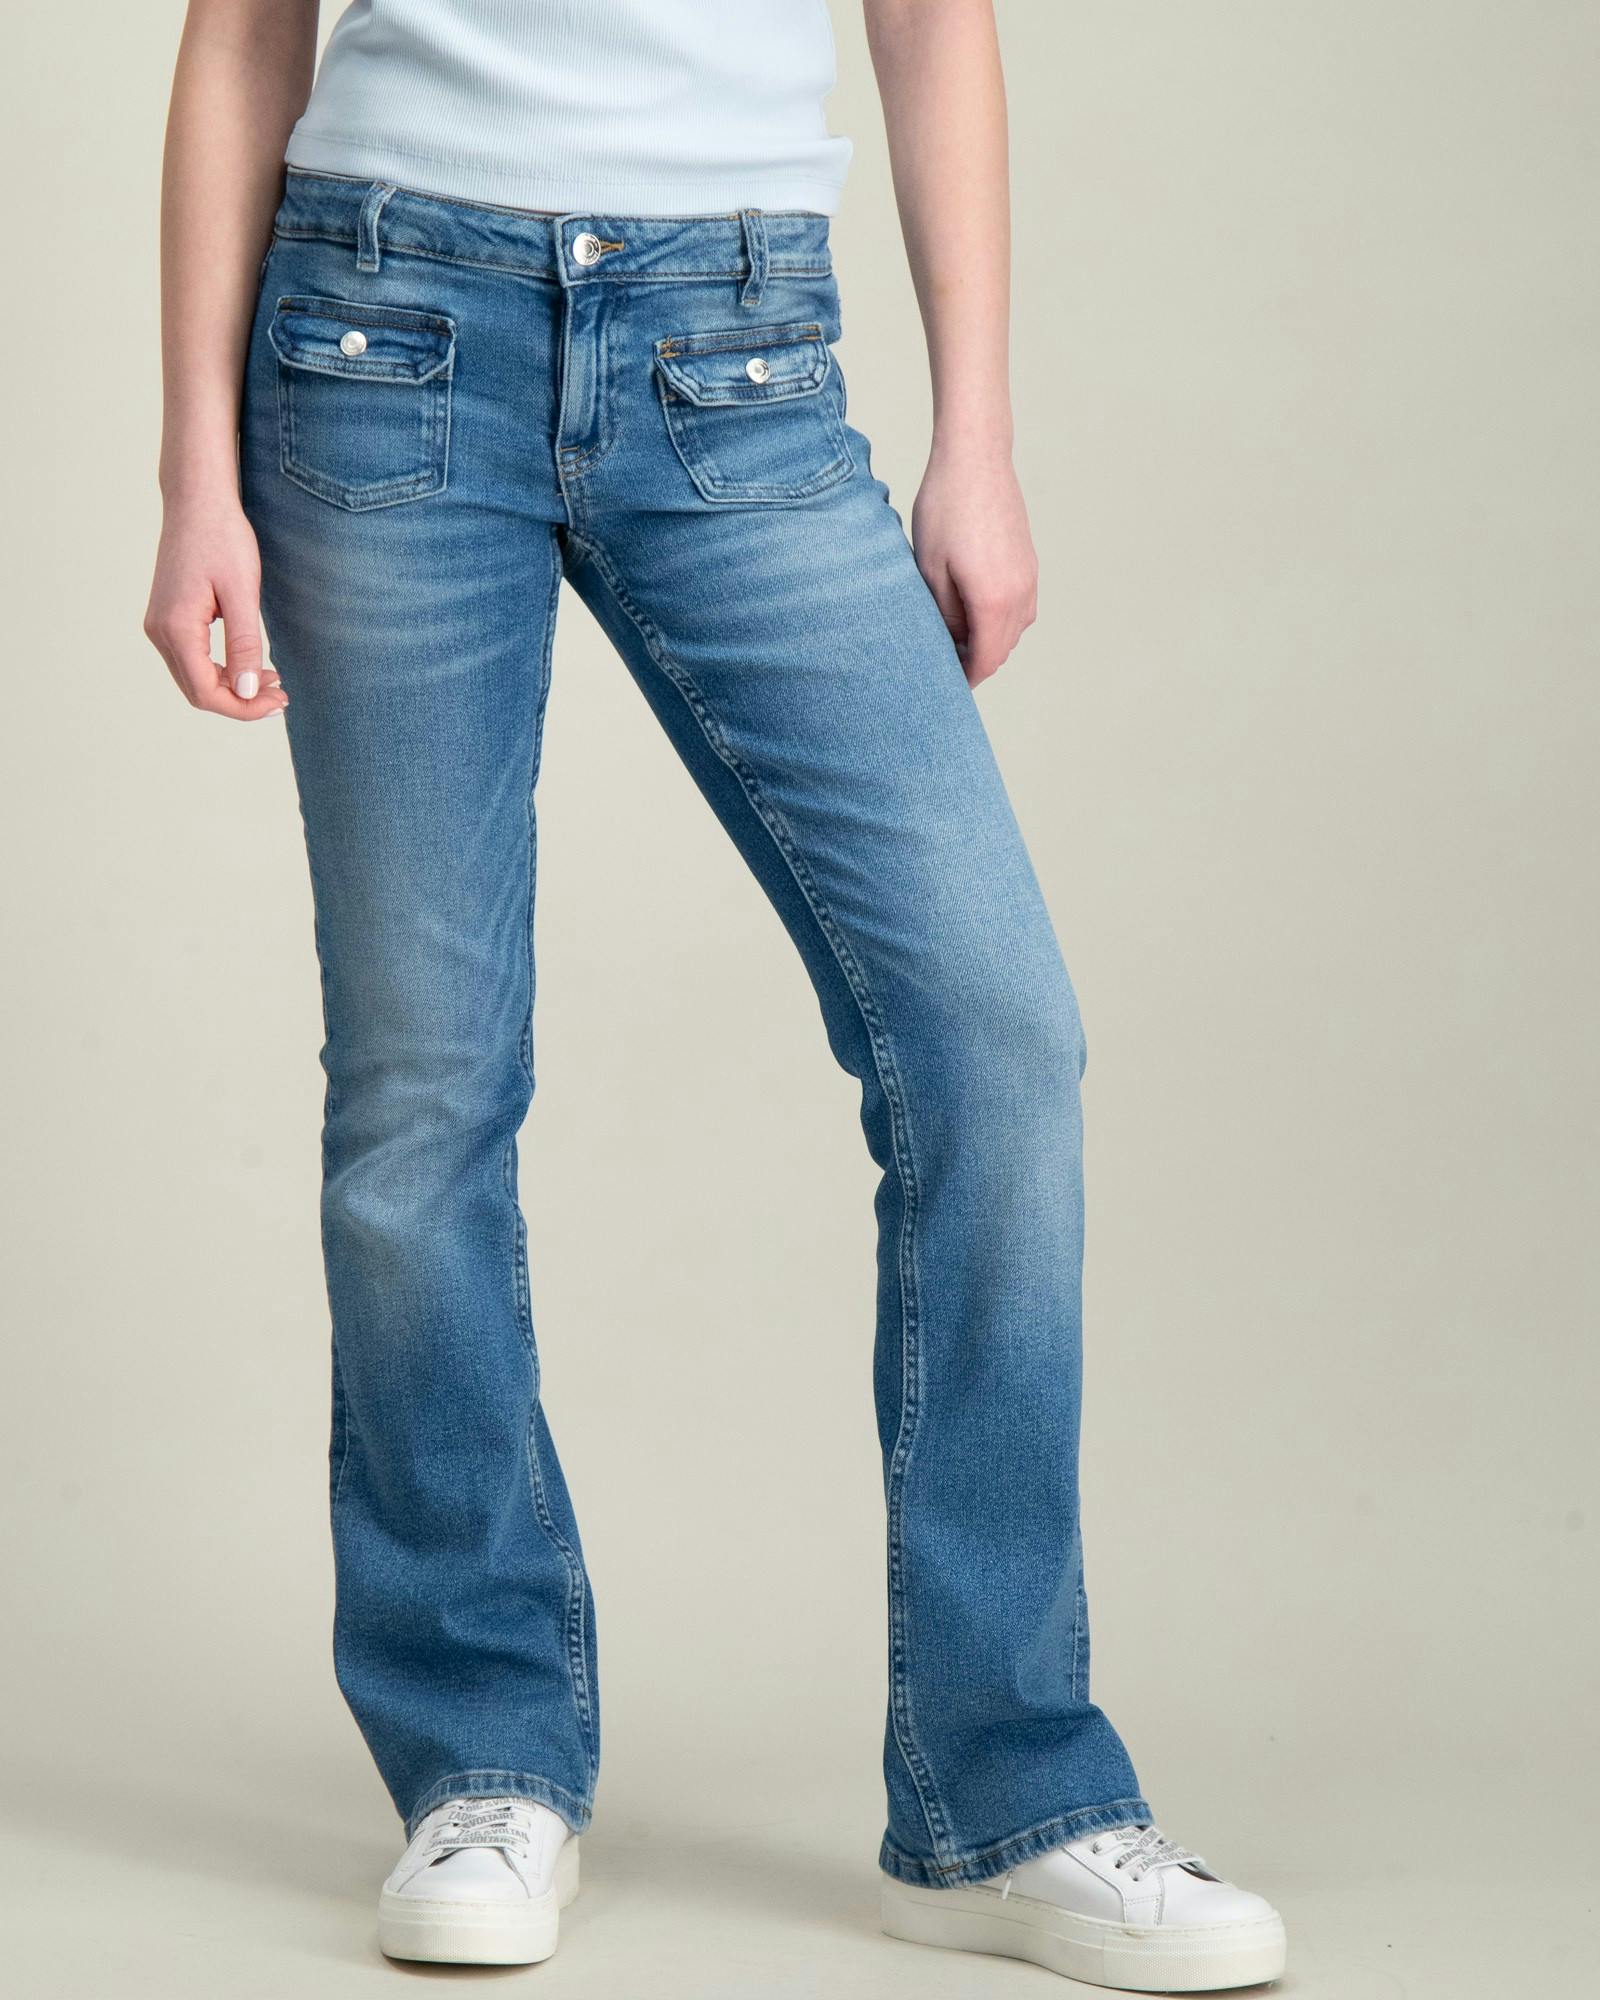 Front pocket bootcut jeans